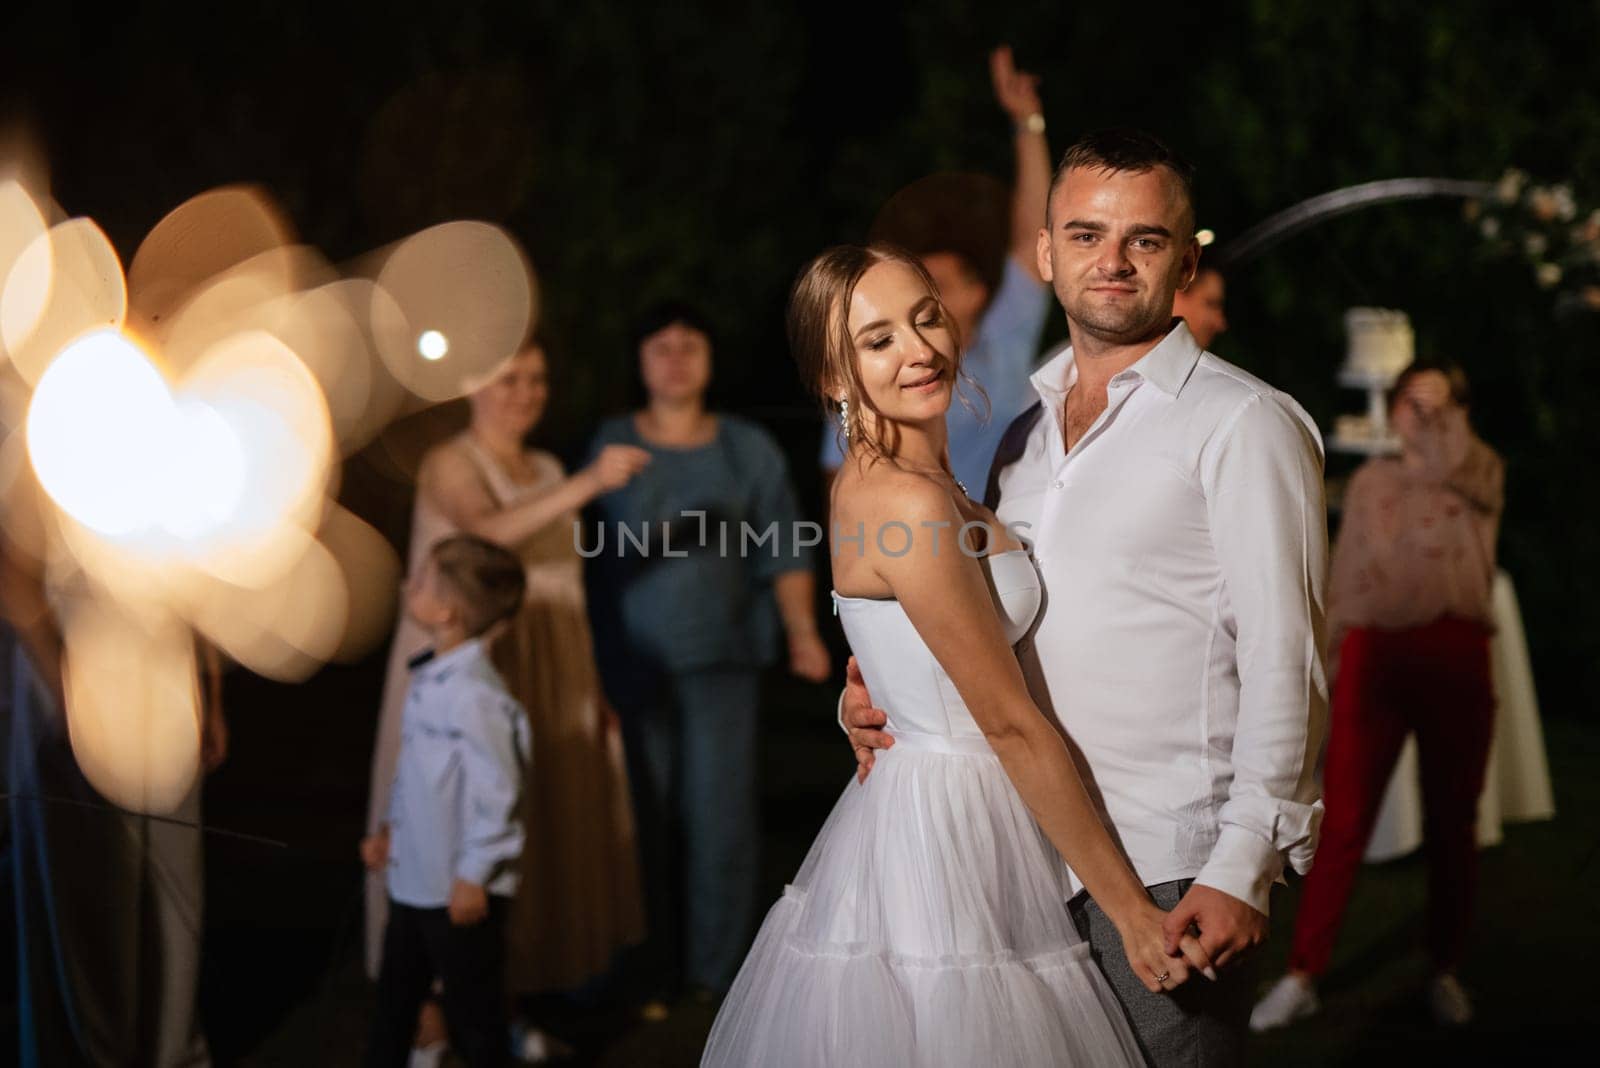 newlyweds at a wedding of sparklers by Andreua